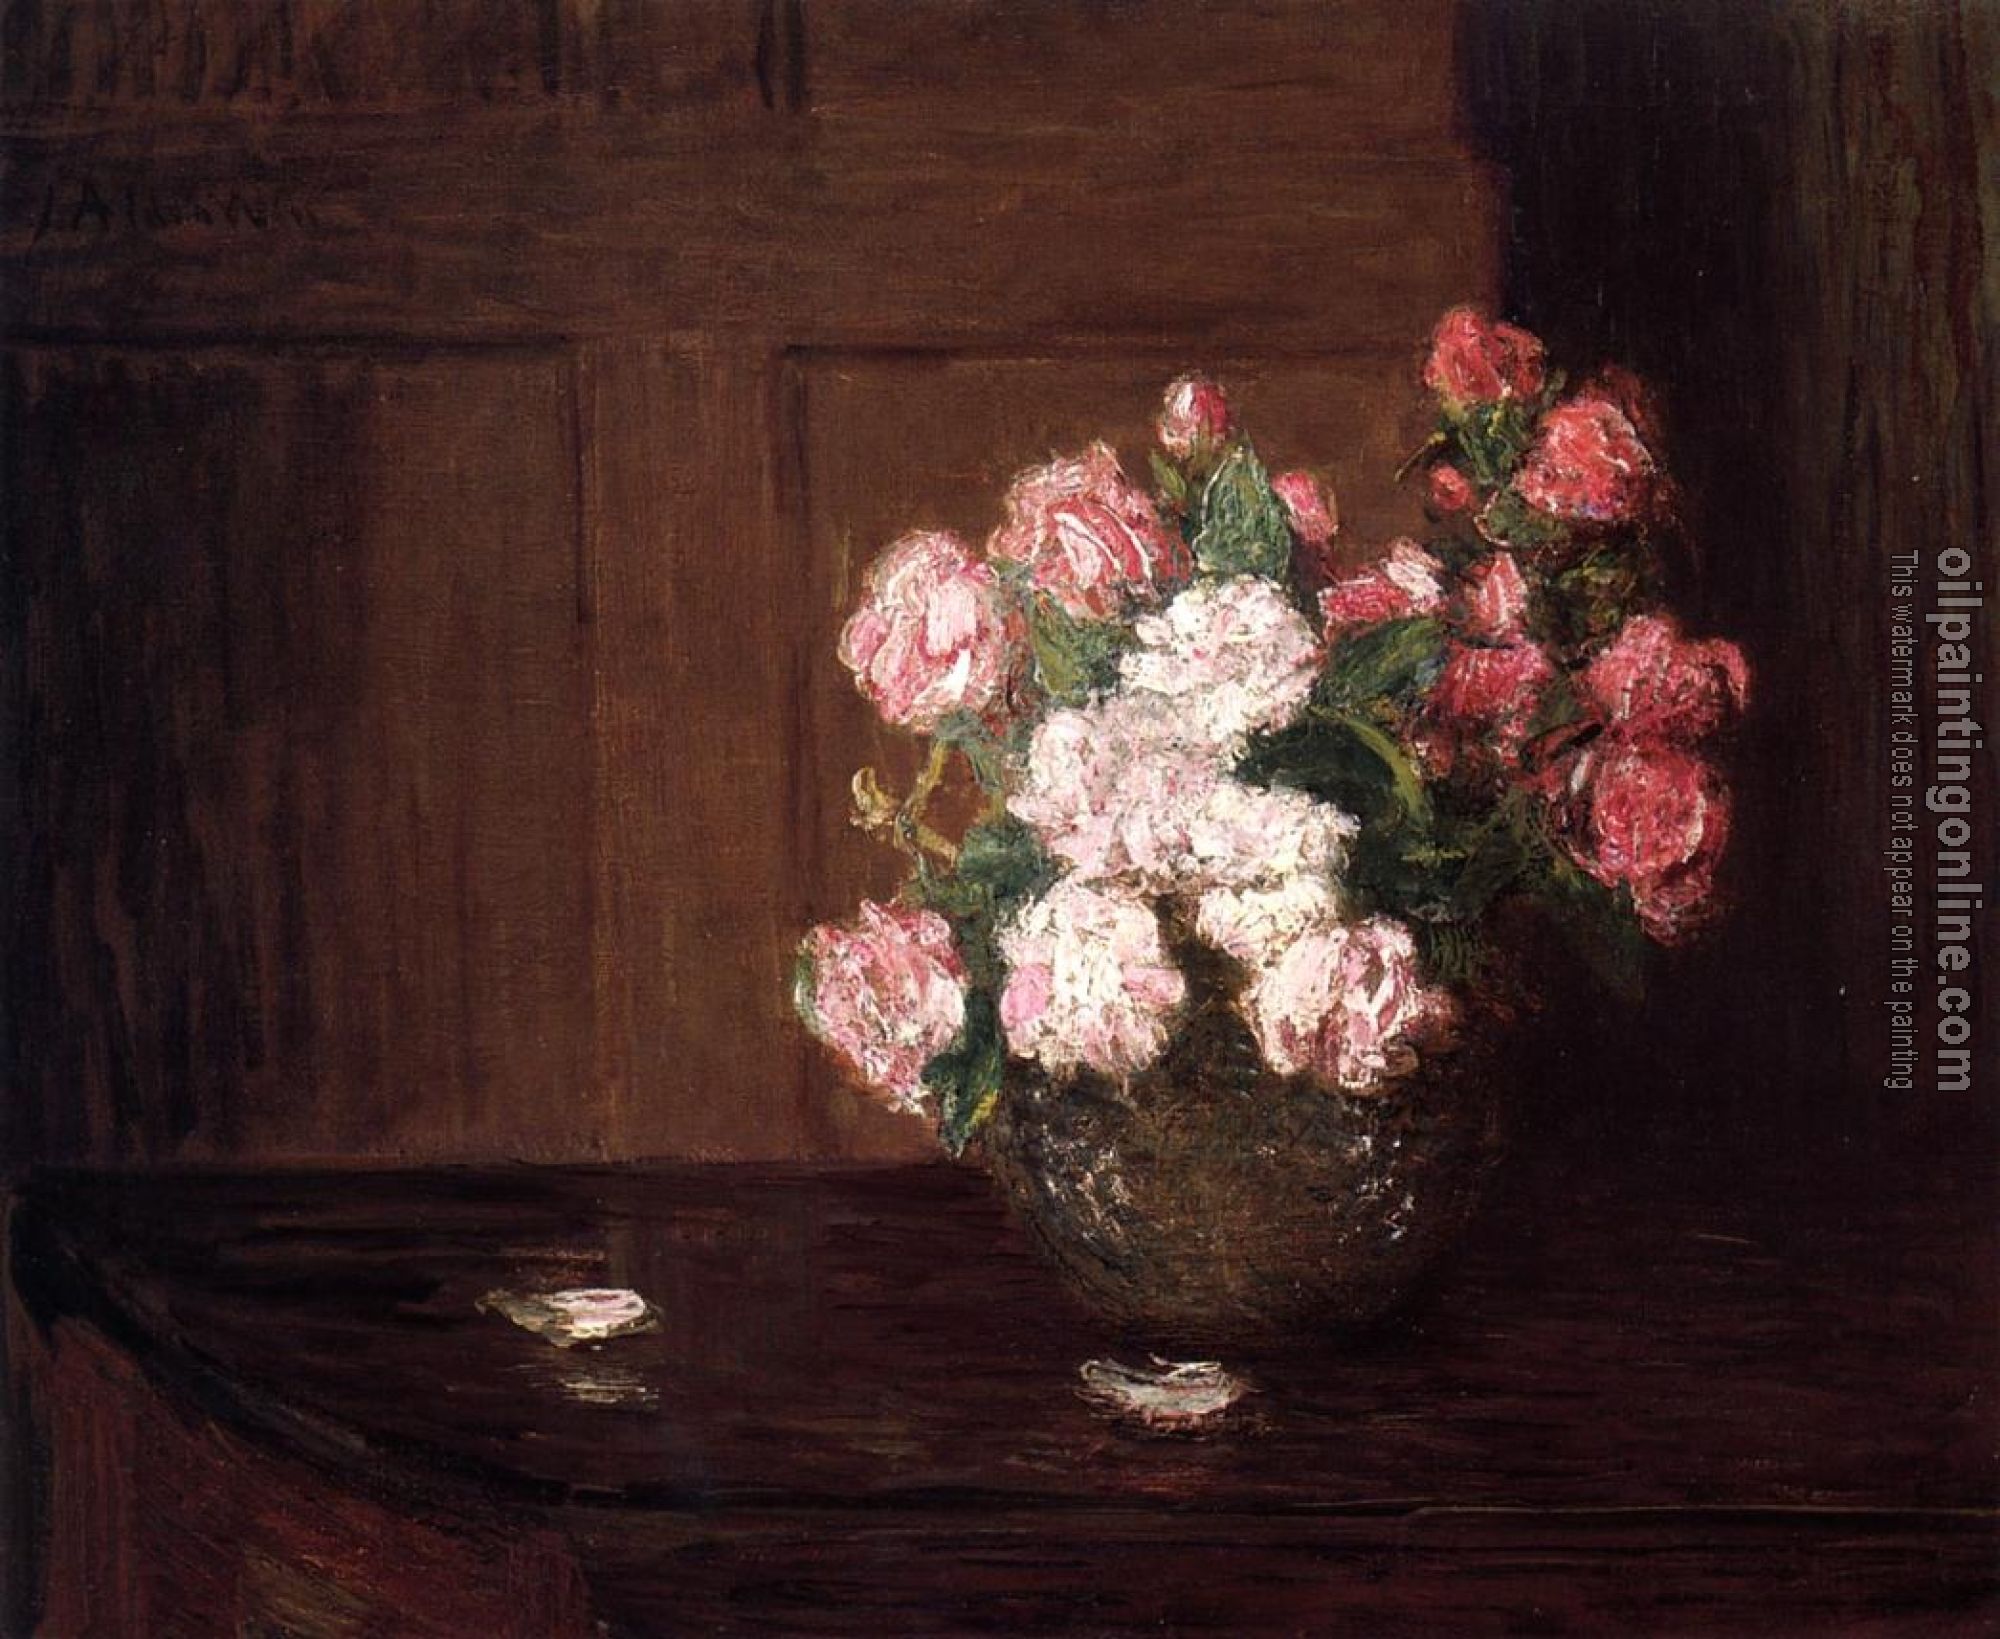 Weir, Julian Alden - Roses in a Silver Bowl on a Mahogany Table